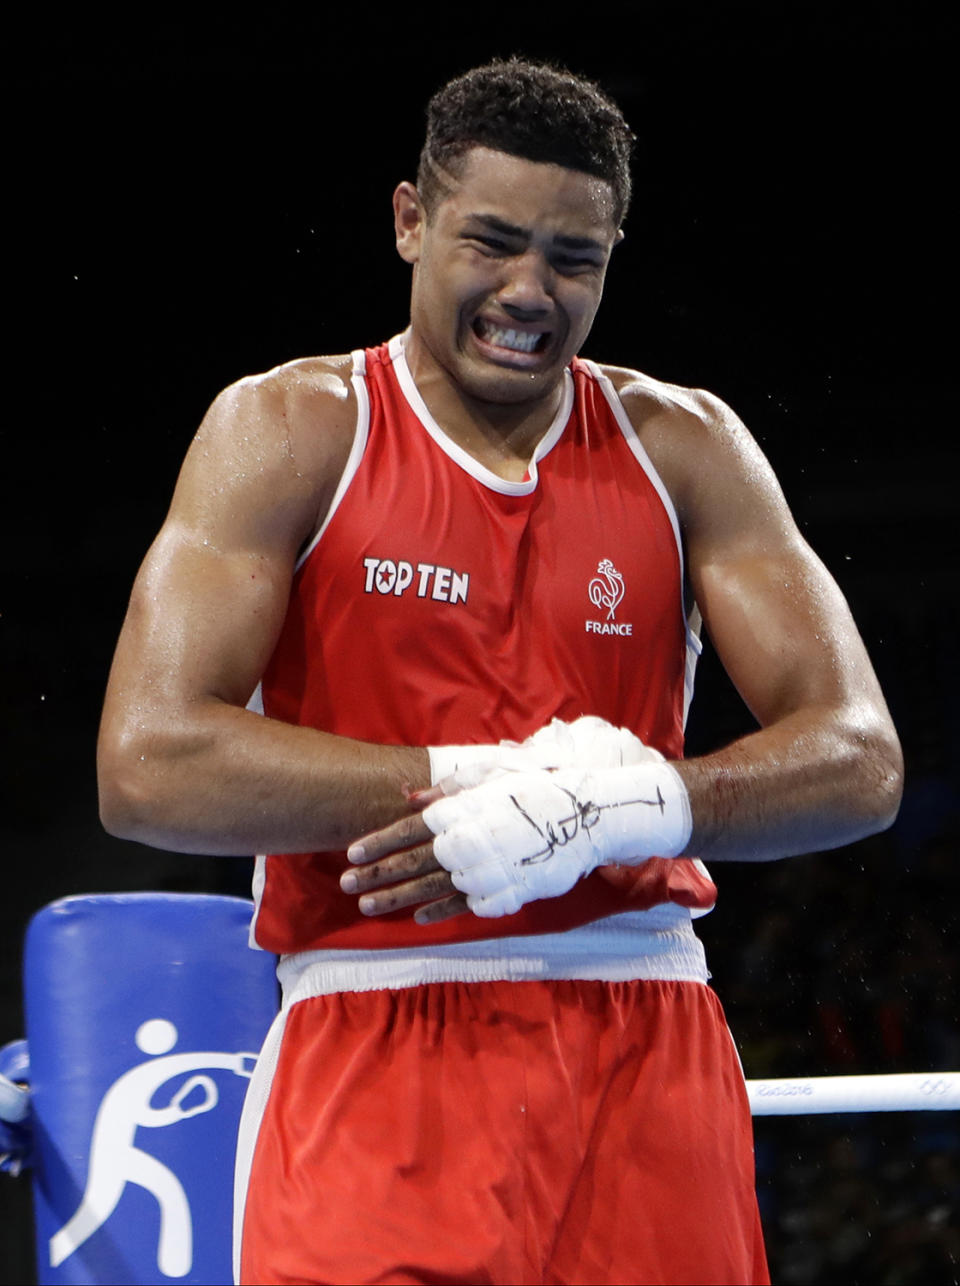 <p>France’s Paul Omba Biongolo cries after losing a match against Azerbaijan’s Abdullayev Abdulkadir during a men’s heavyweight 91-kg preliminary boxing match at the 2016 Summer Olympics in Rio de Janeiro, Brazil, Monday, Aug. 8, 2016. (AP Photo/Frank Franklin II) </p>